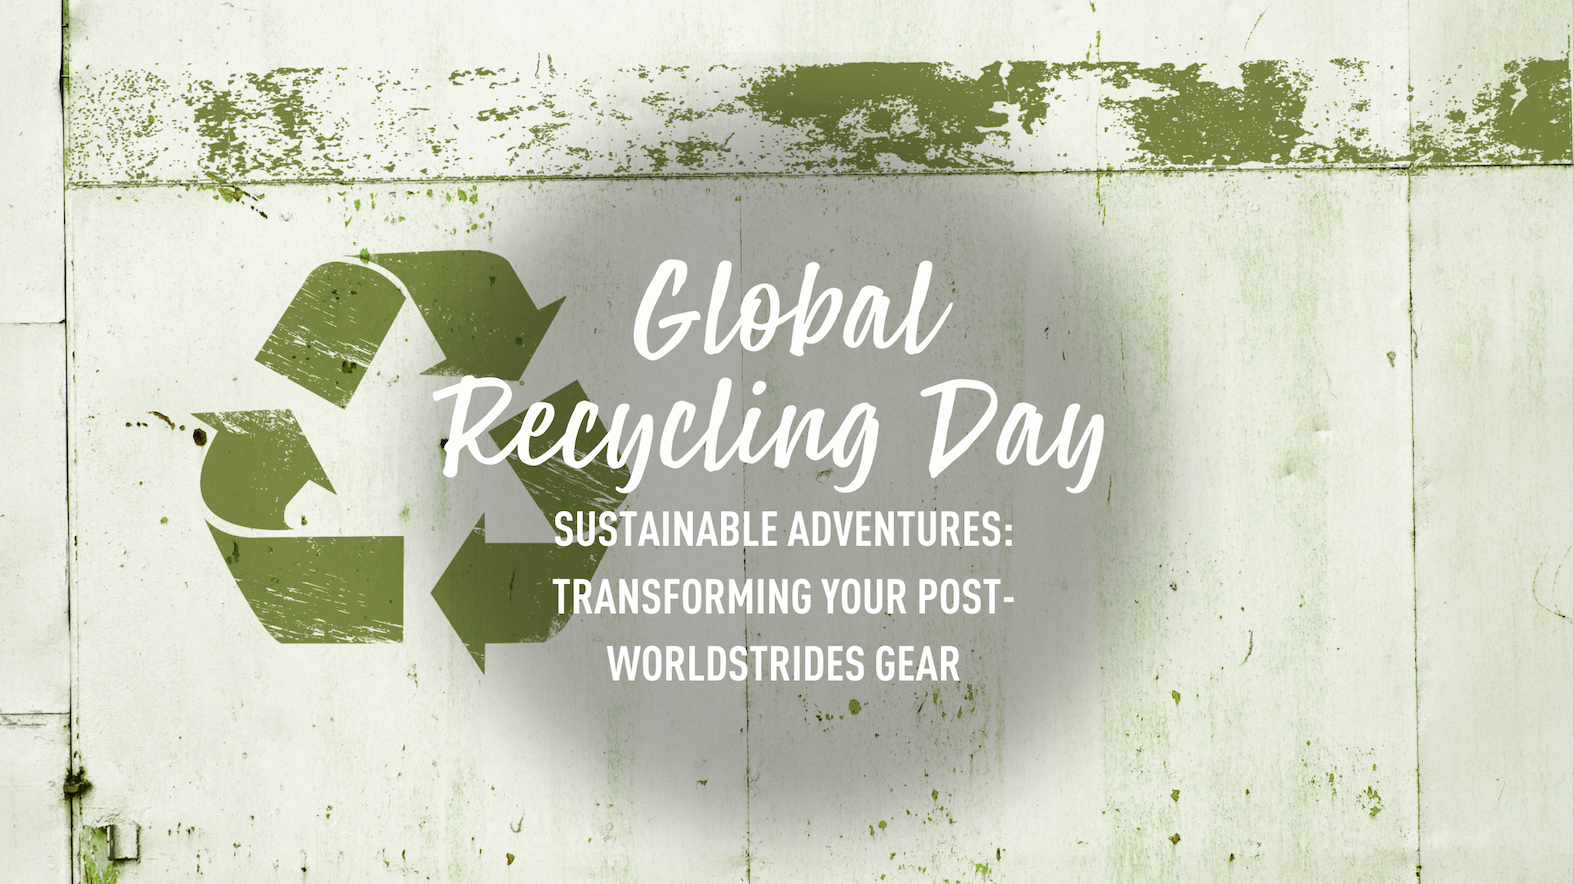 Global Recycling Day: Transforming Your Post-WorldStrides Gear